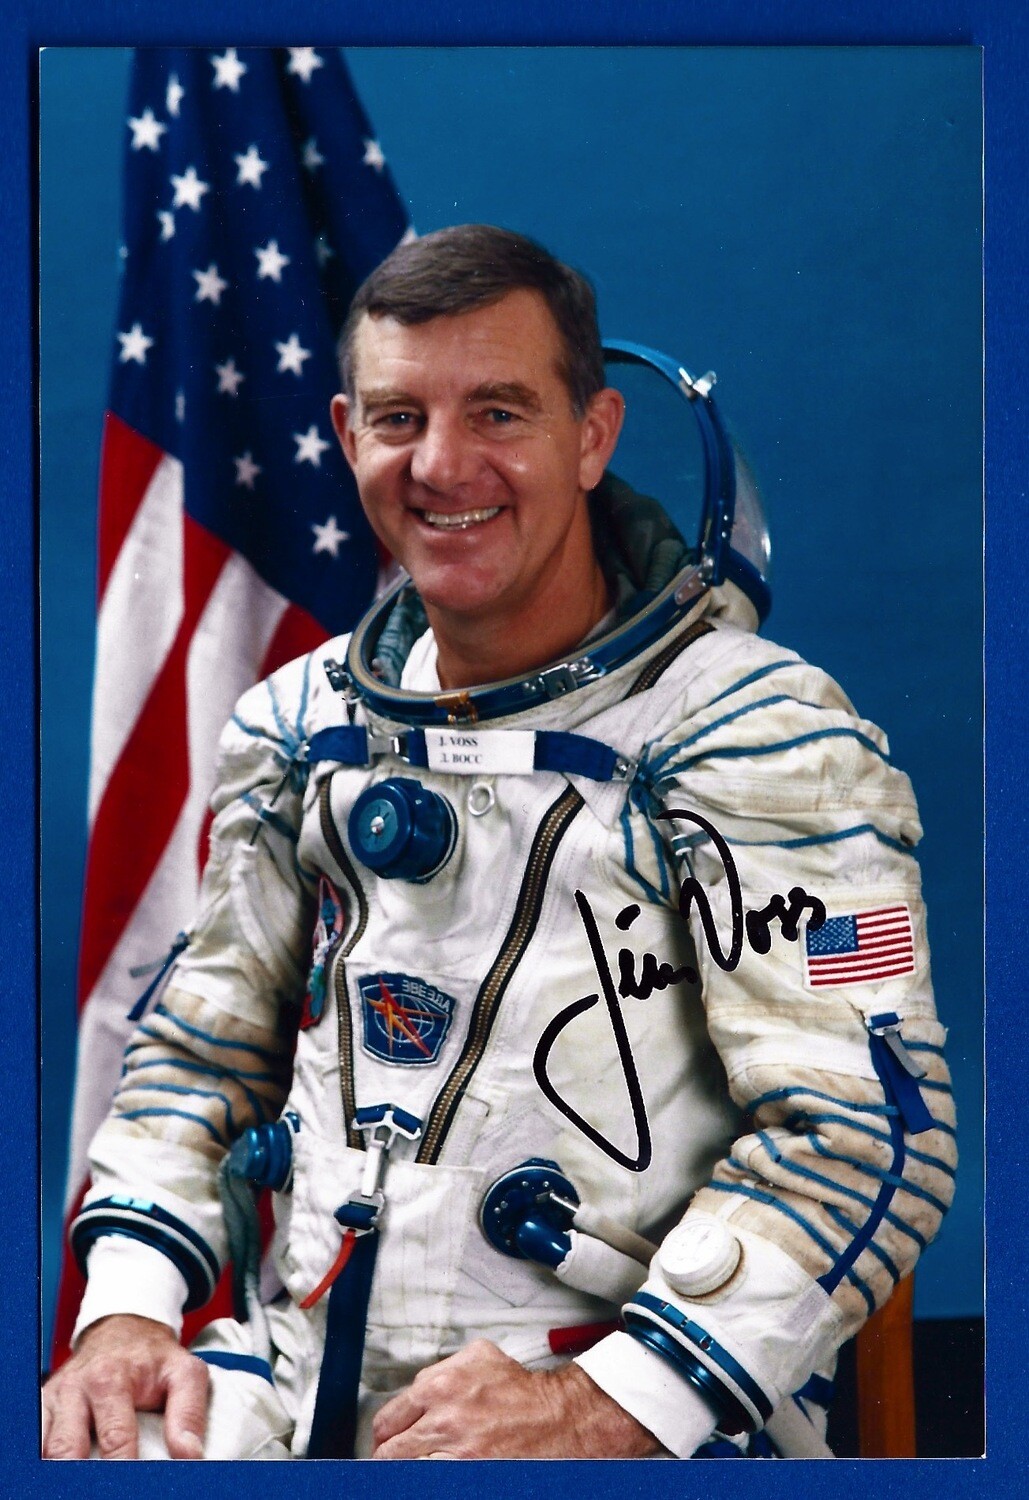 James S. Voss NASA astronaut signed picture